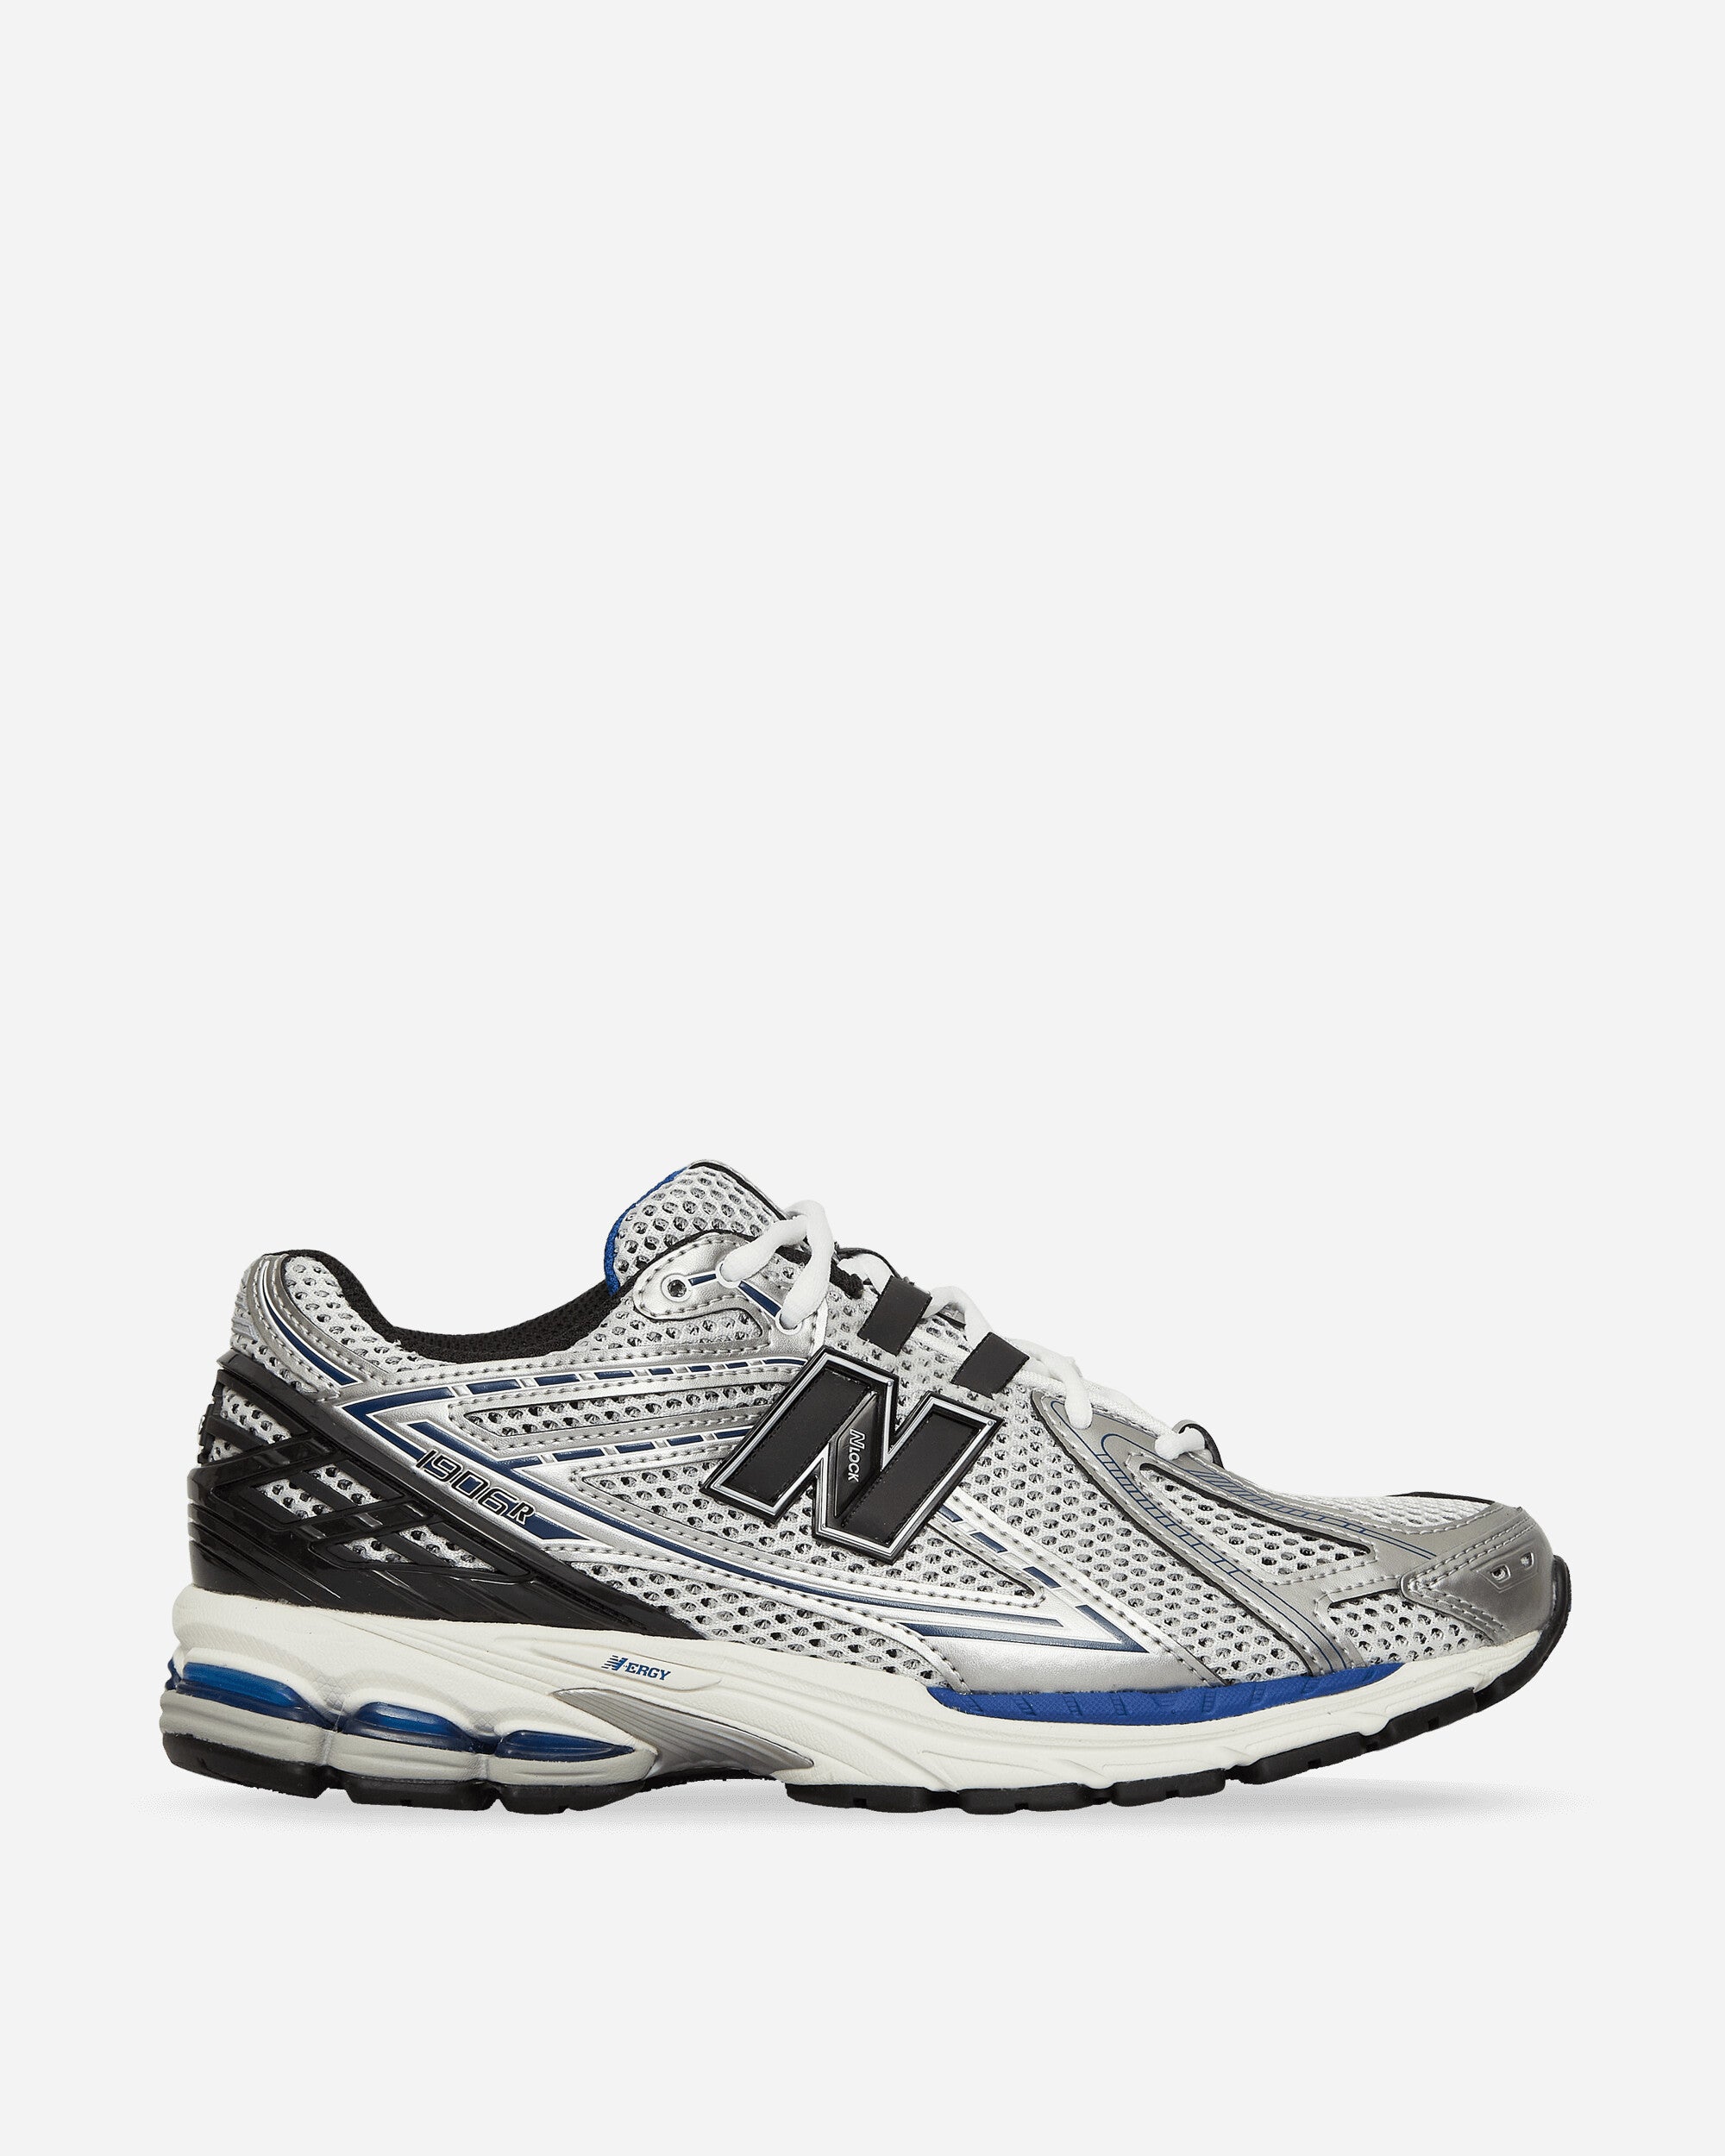 New Balance 1906R Sneakers Silver Metallic - Jam Official Store